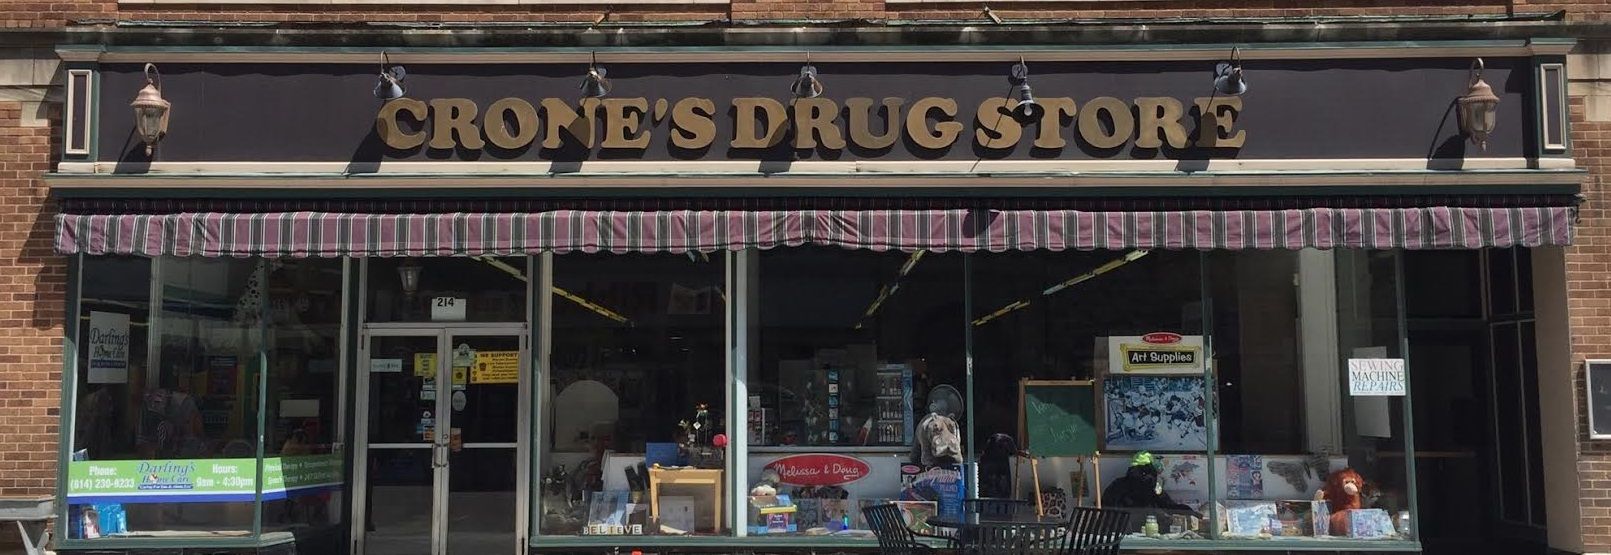 Crone's store front 1.jpg